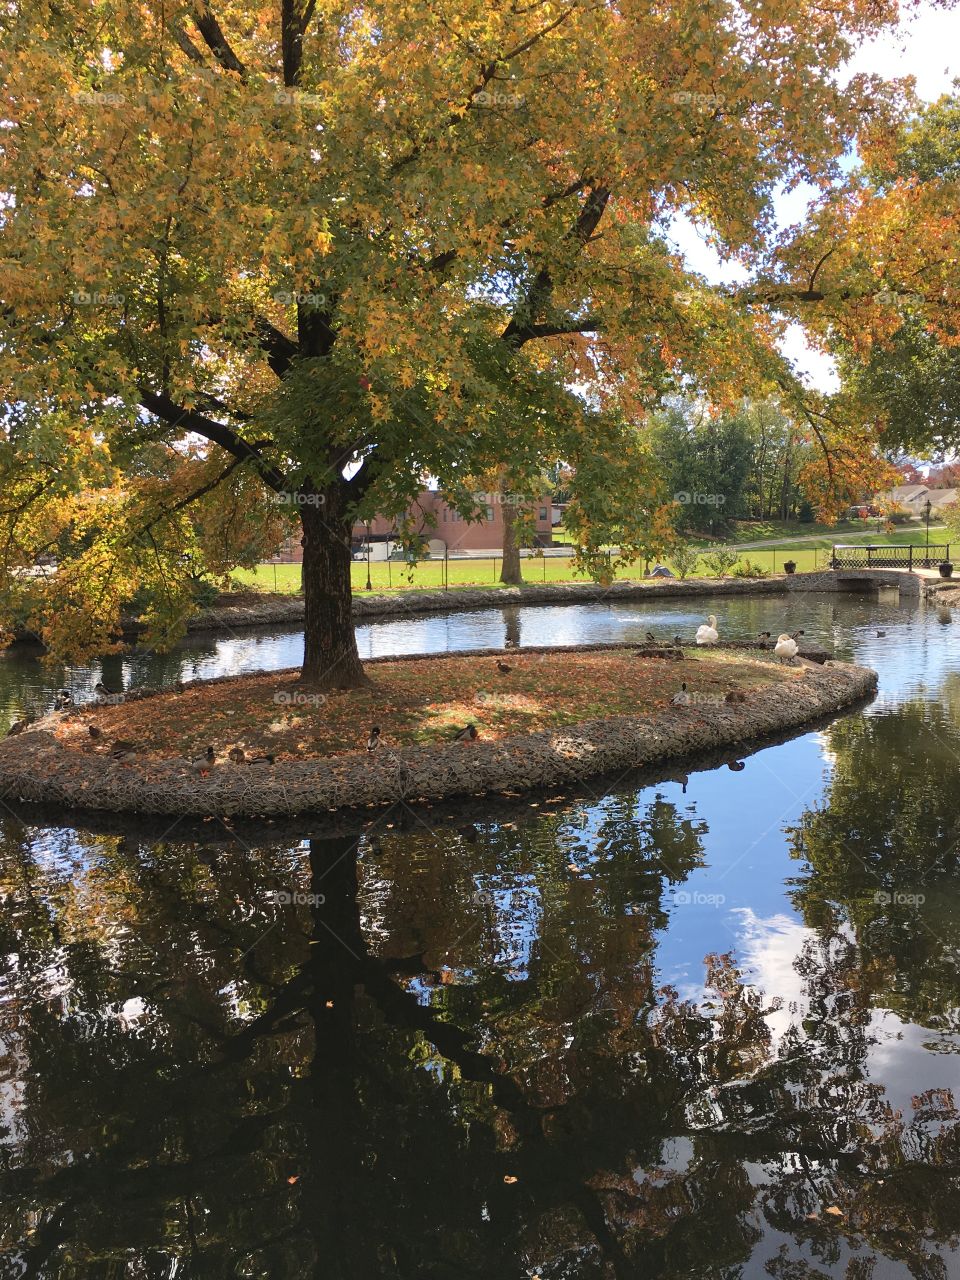 Pond and Island. At Millersville University, students often hangout around the pond and visit the ducks between classes. 